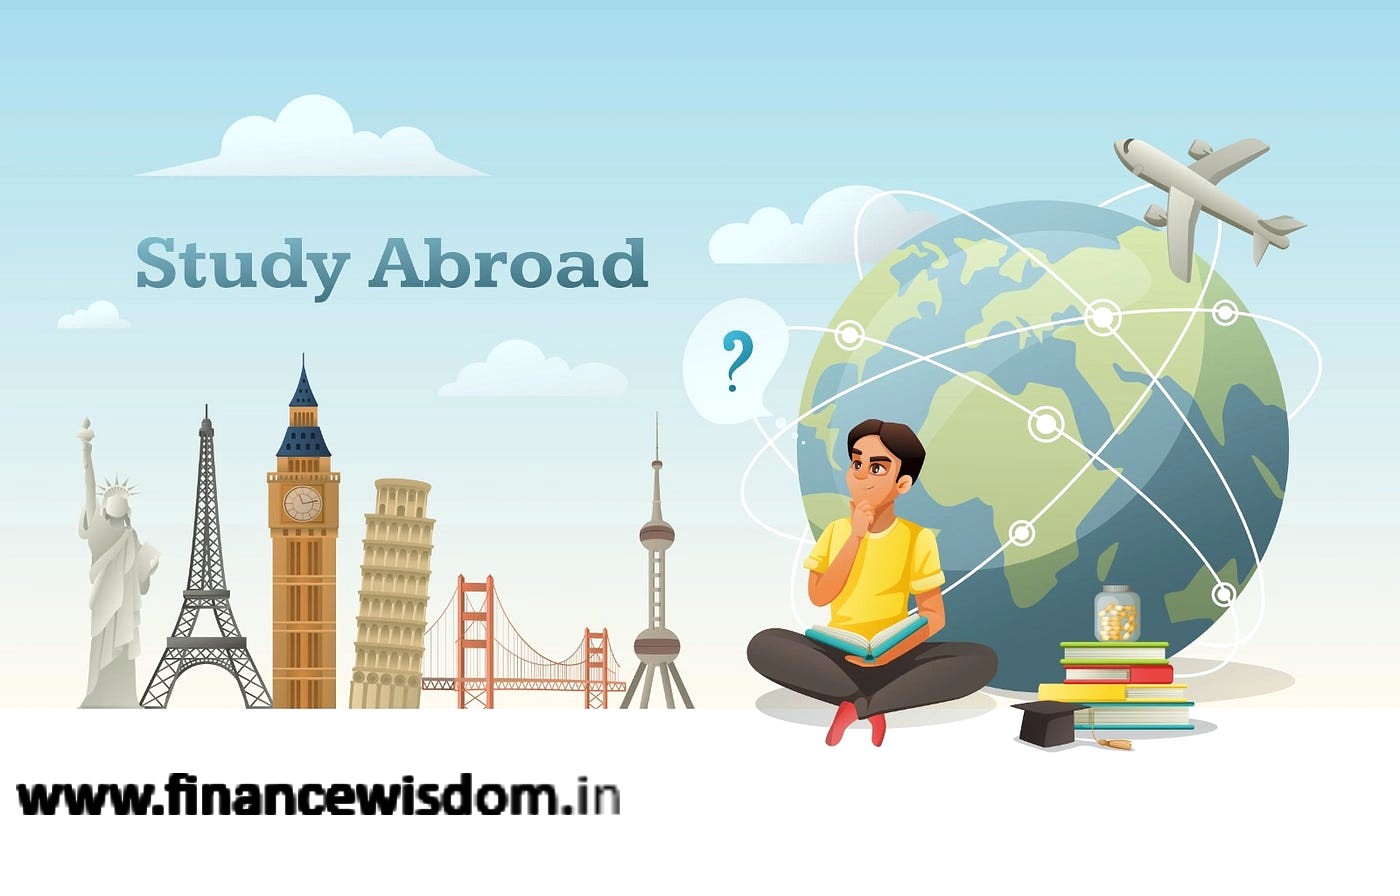 How to get Study abroad loan